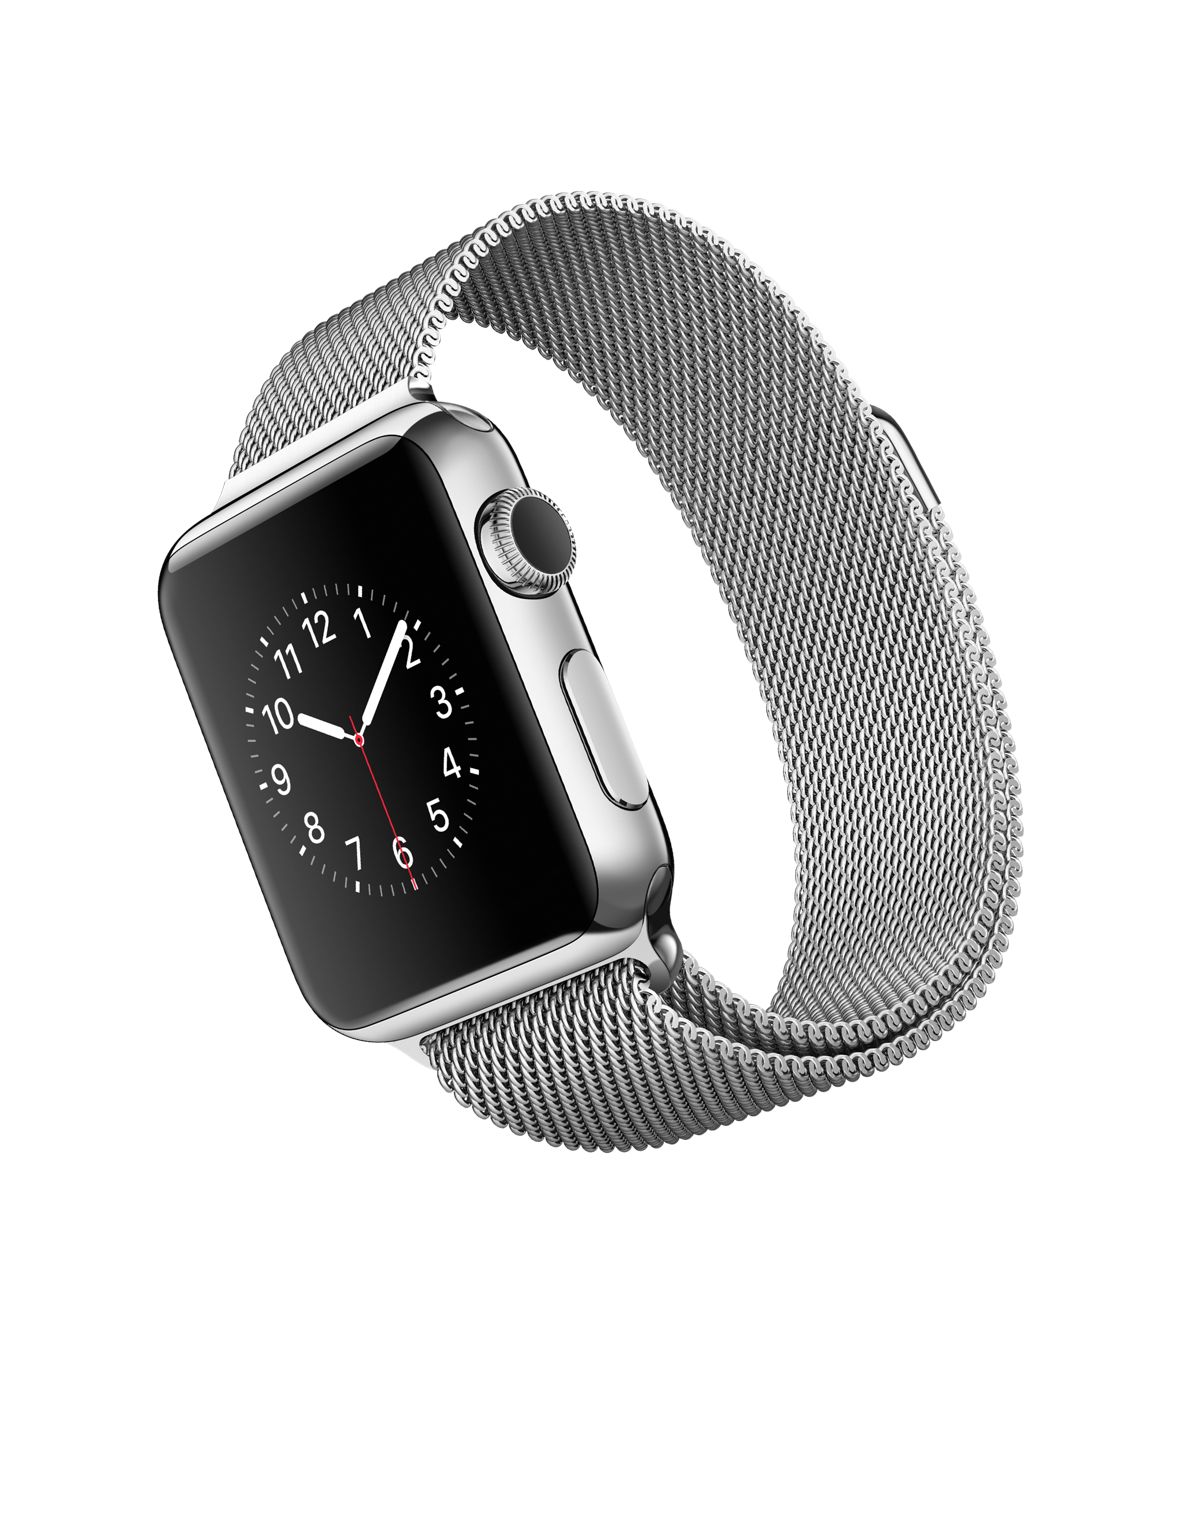 Apple watch a2722. Apple watch Series 2 Stainless Steel. Apple watch 42mm Stainless Steel 1st. Apple watch Series 1 Stainless Steel. A1553 Apple IWATCH.